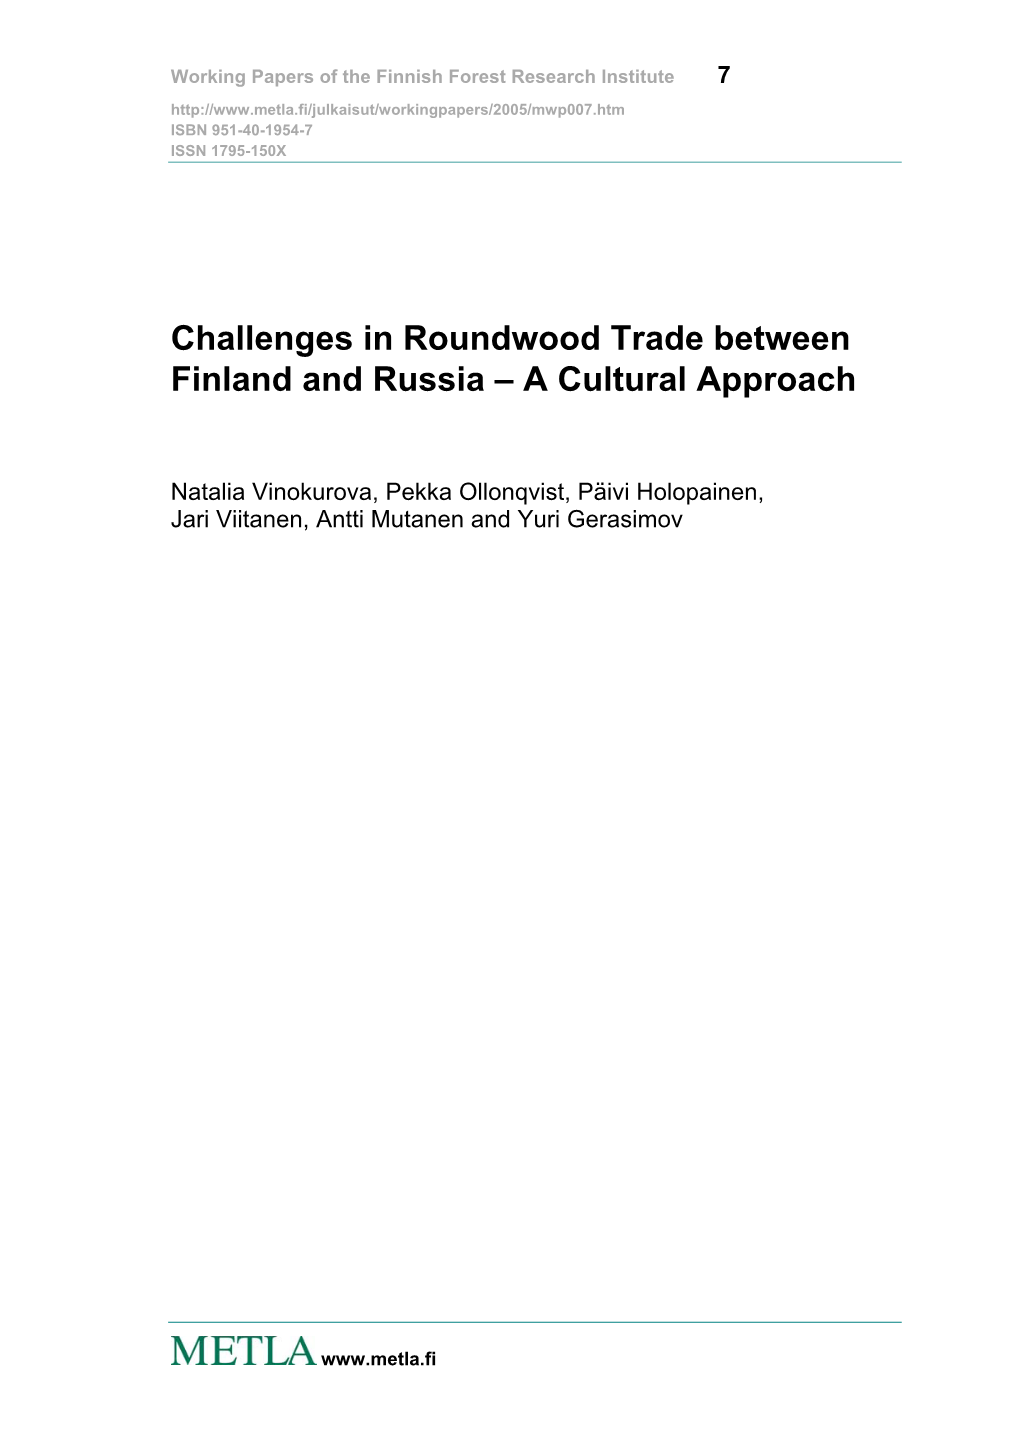 Challenges in Roundwood Trade Between Finland and Russia – a Cultural Approach